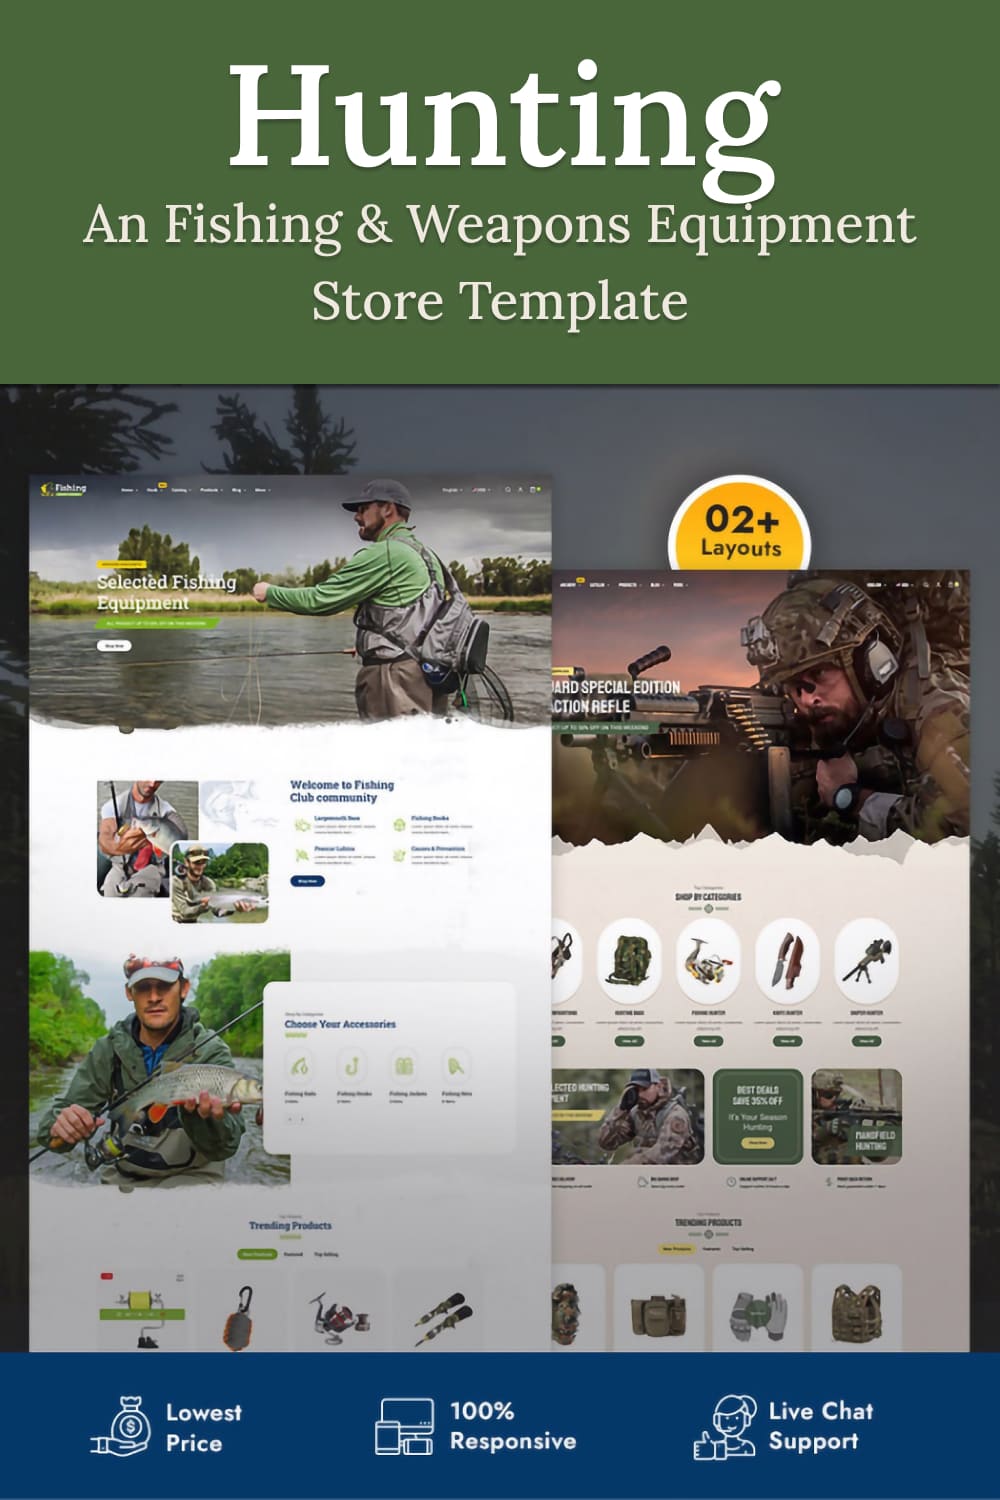 Hunting - An Fishing & Weapons Equipment Store Template - Multipurpose Shopify 2.0 Theme - Pinterest.